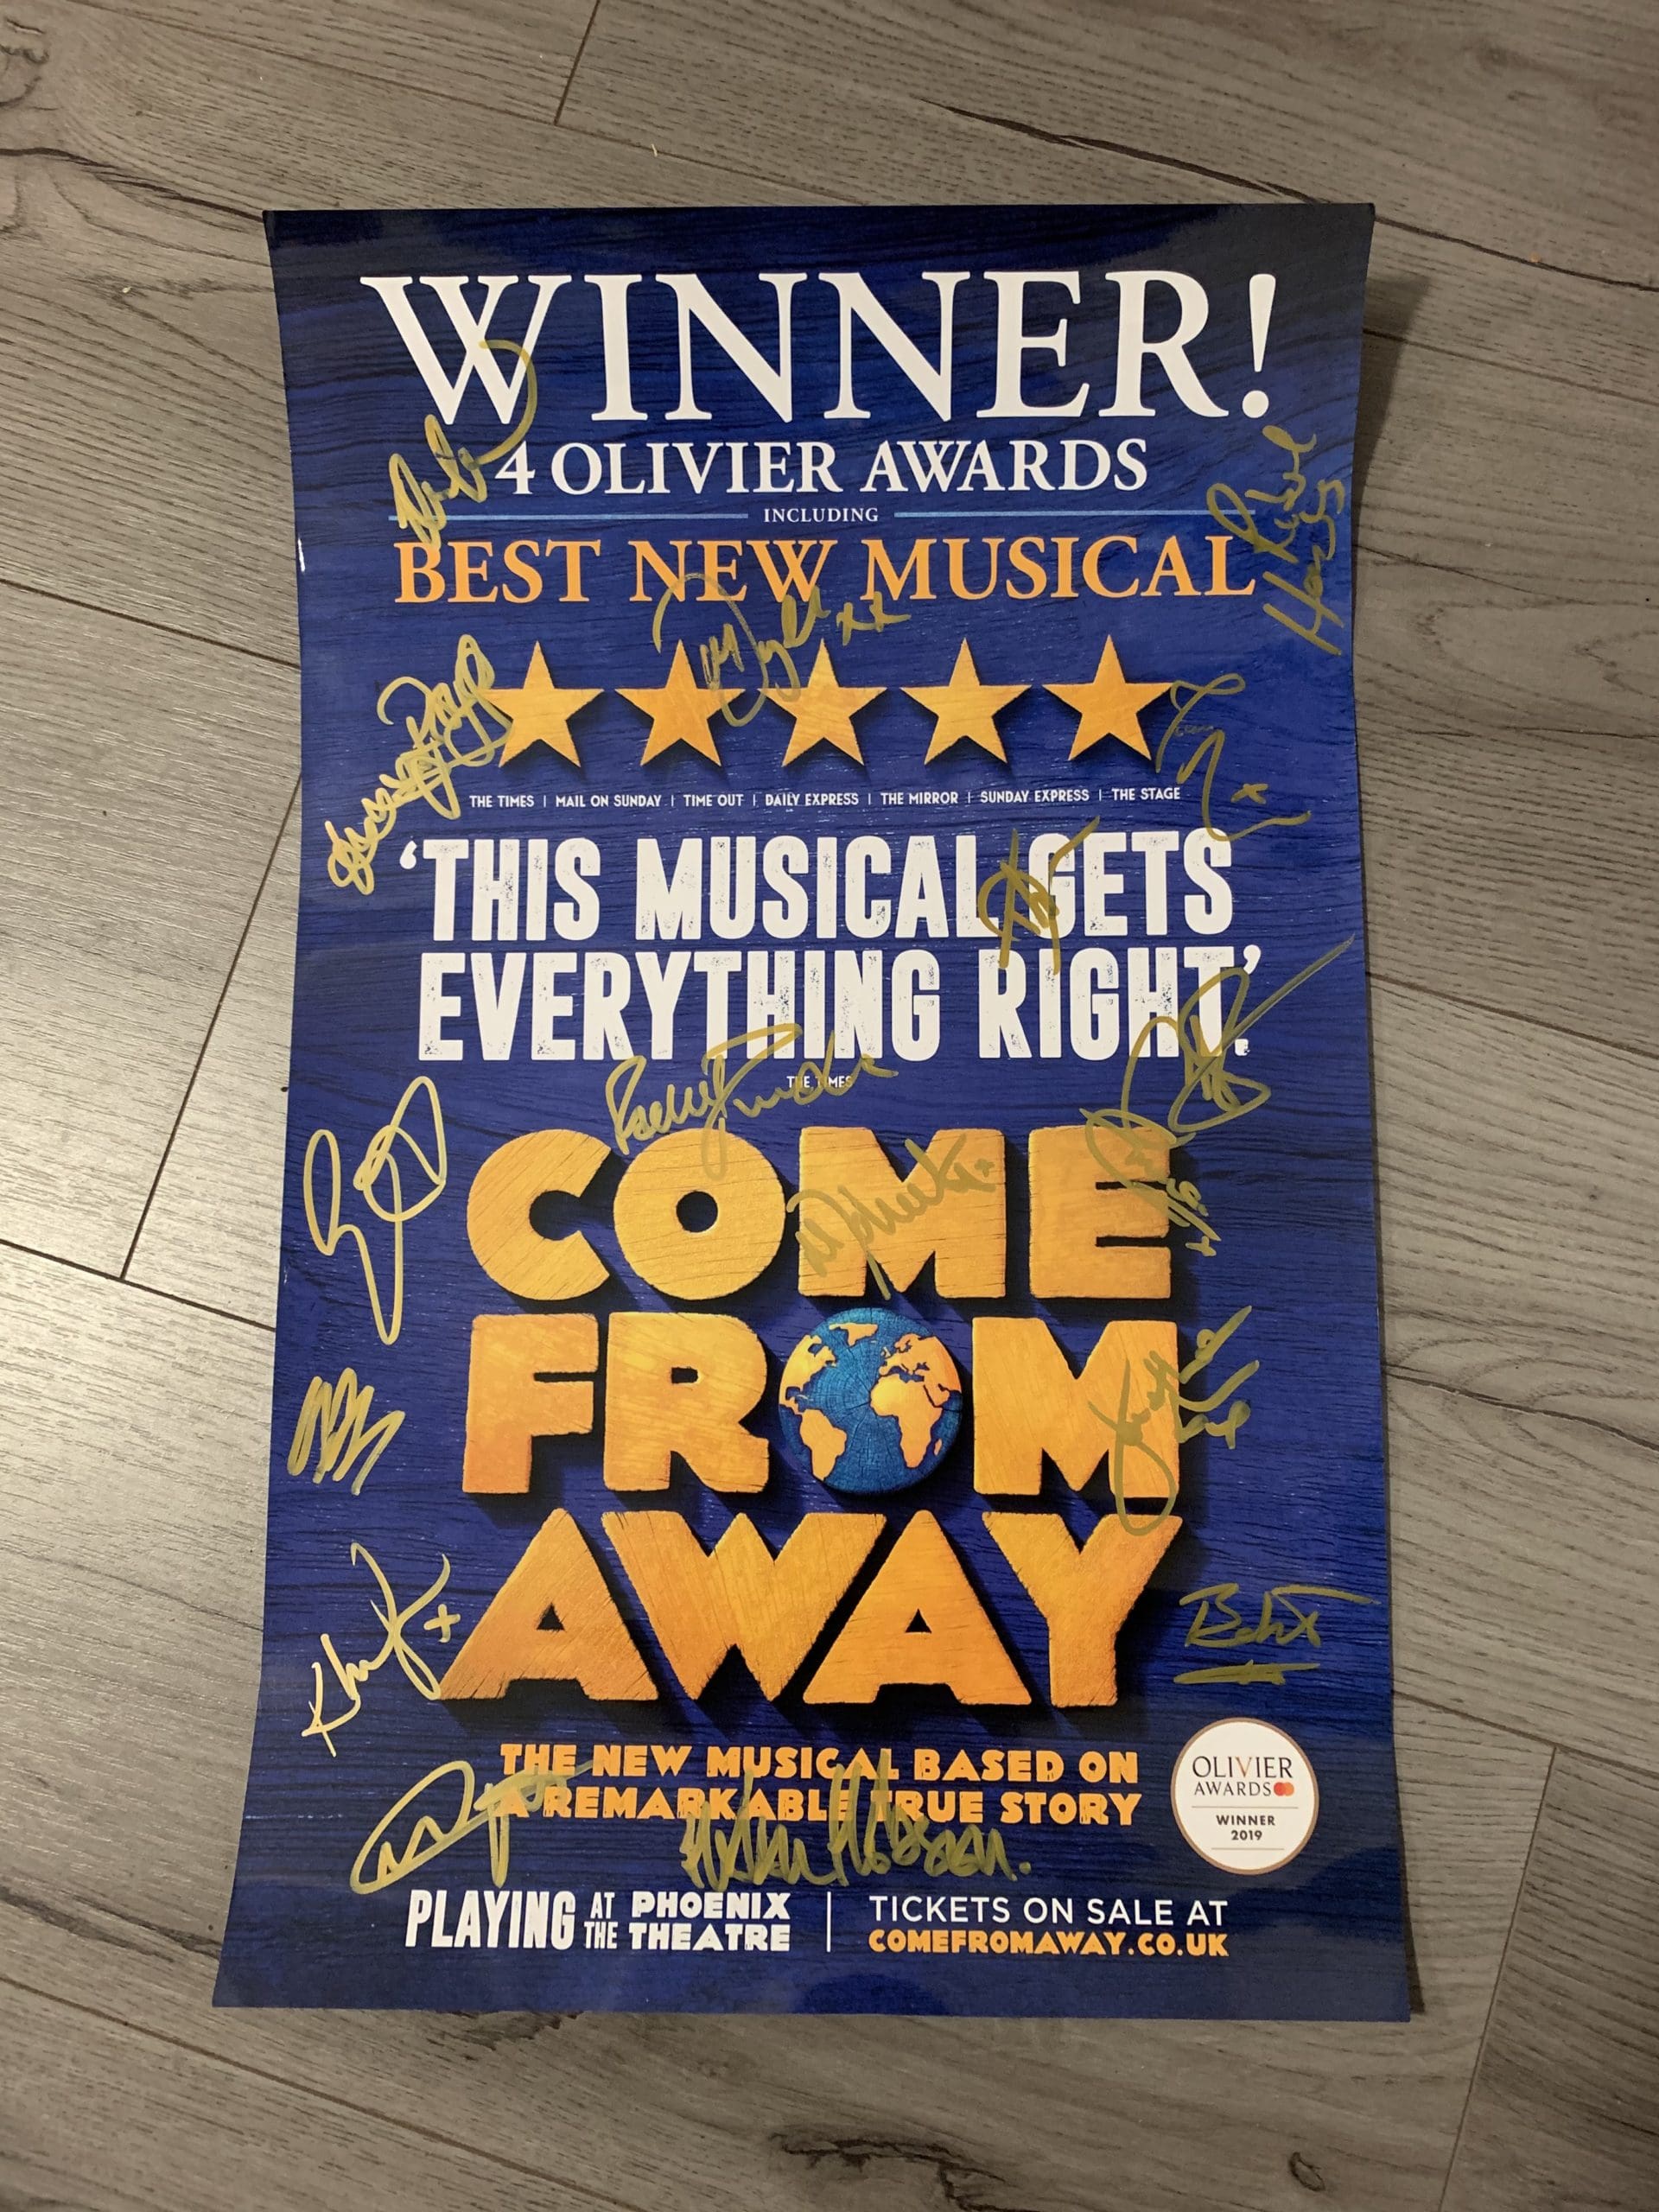 Enter our competition to win a Come From Away poster signed by the cast